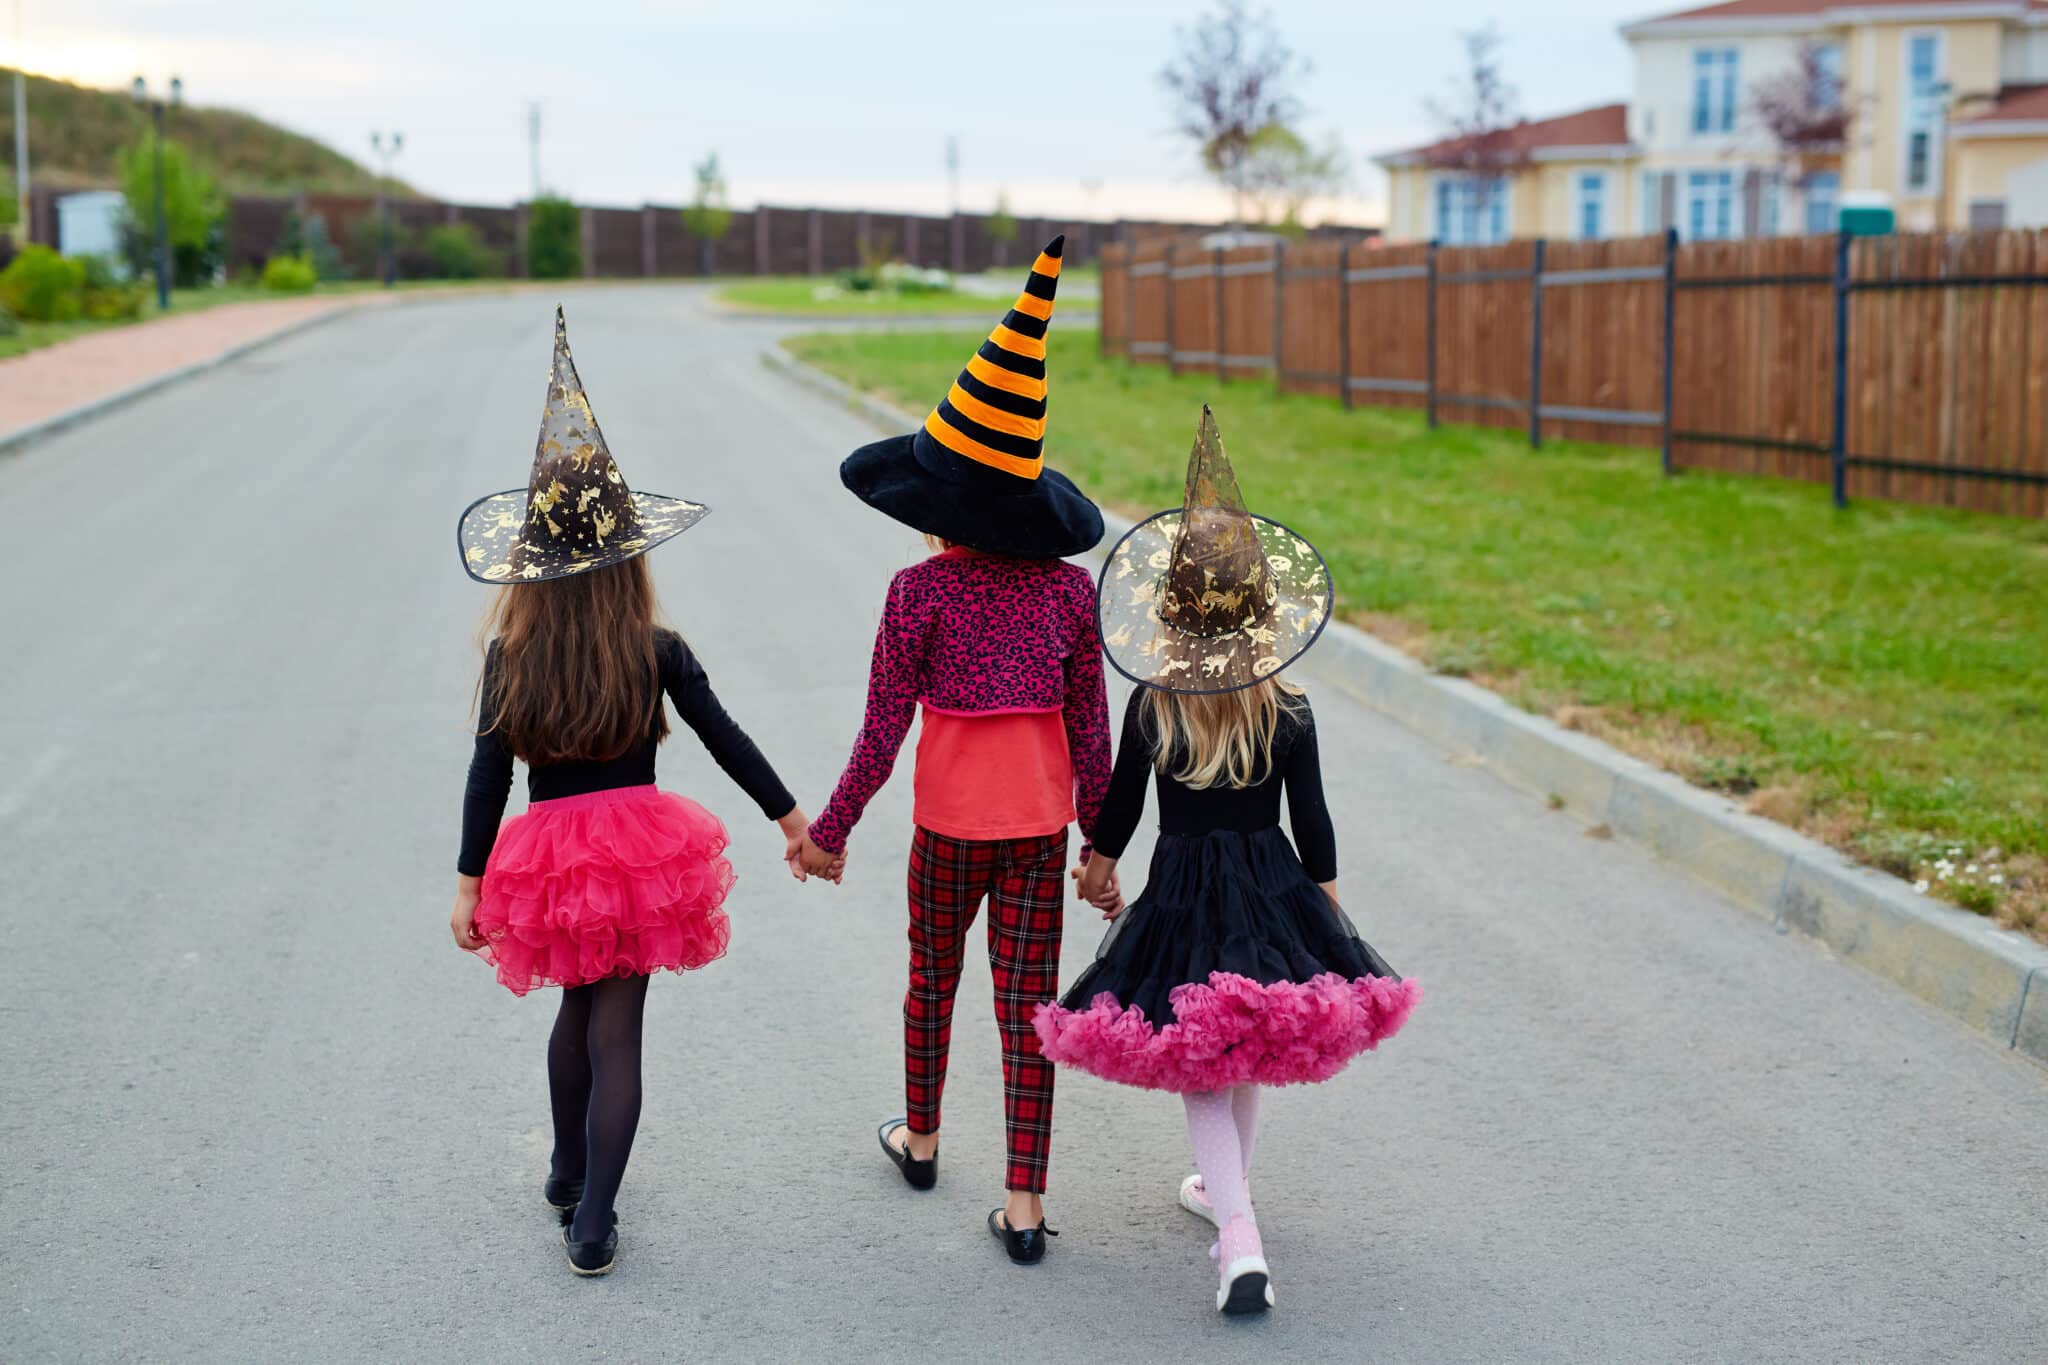 children on a road trick or treating avoiding a pedestrian accident